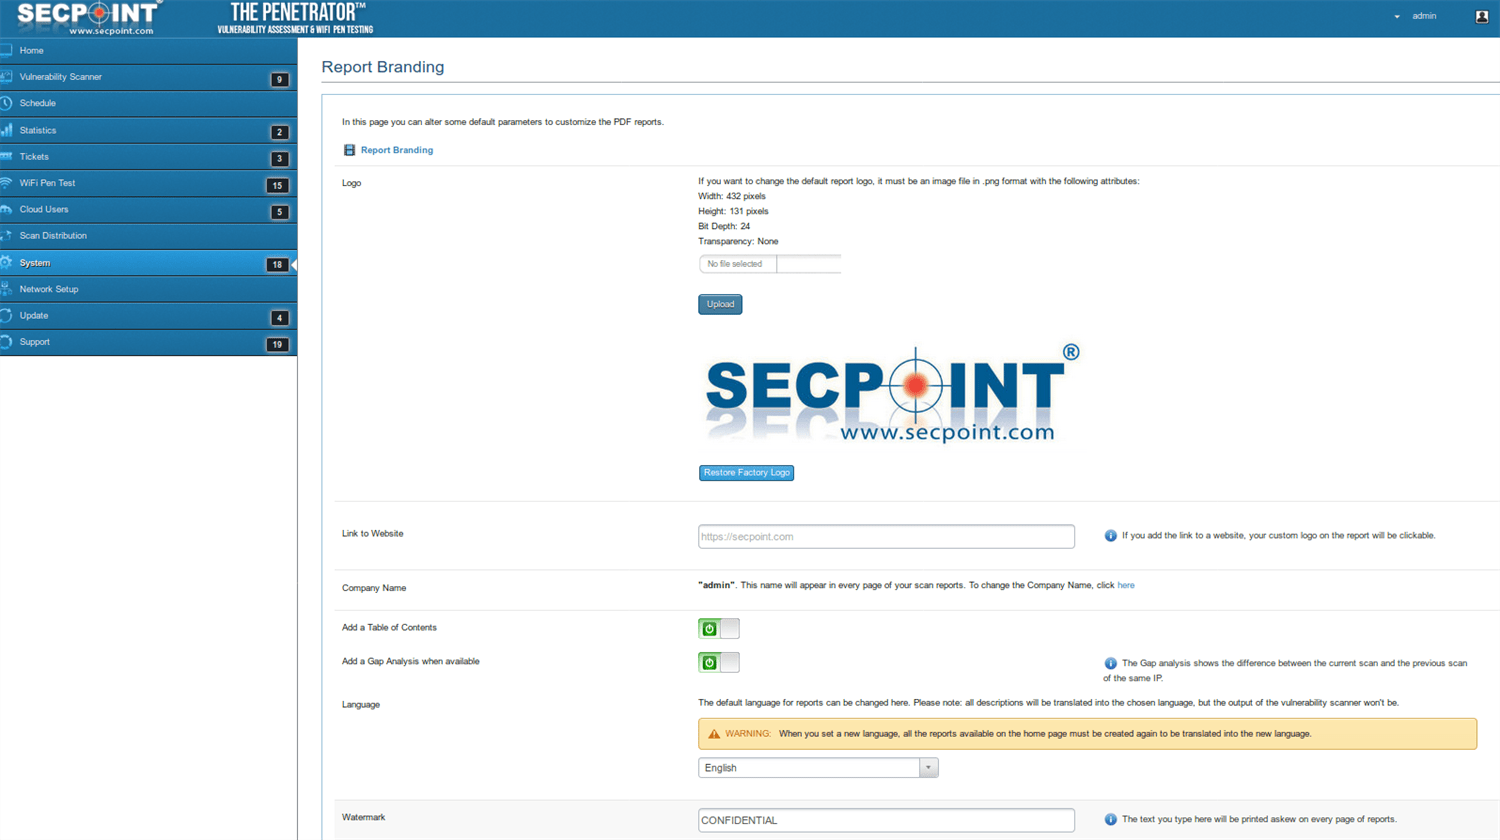 SecPoint Penetrator S9 - 32 IP Concurrent Scan License Vuln Scanning Appliance (1 Year License) - SecPoint